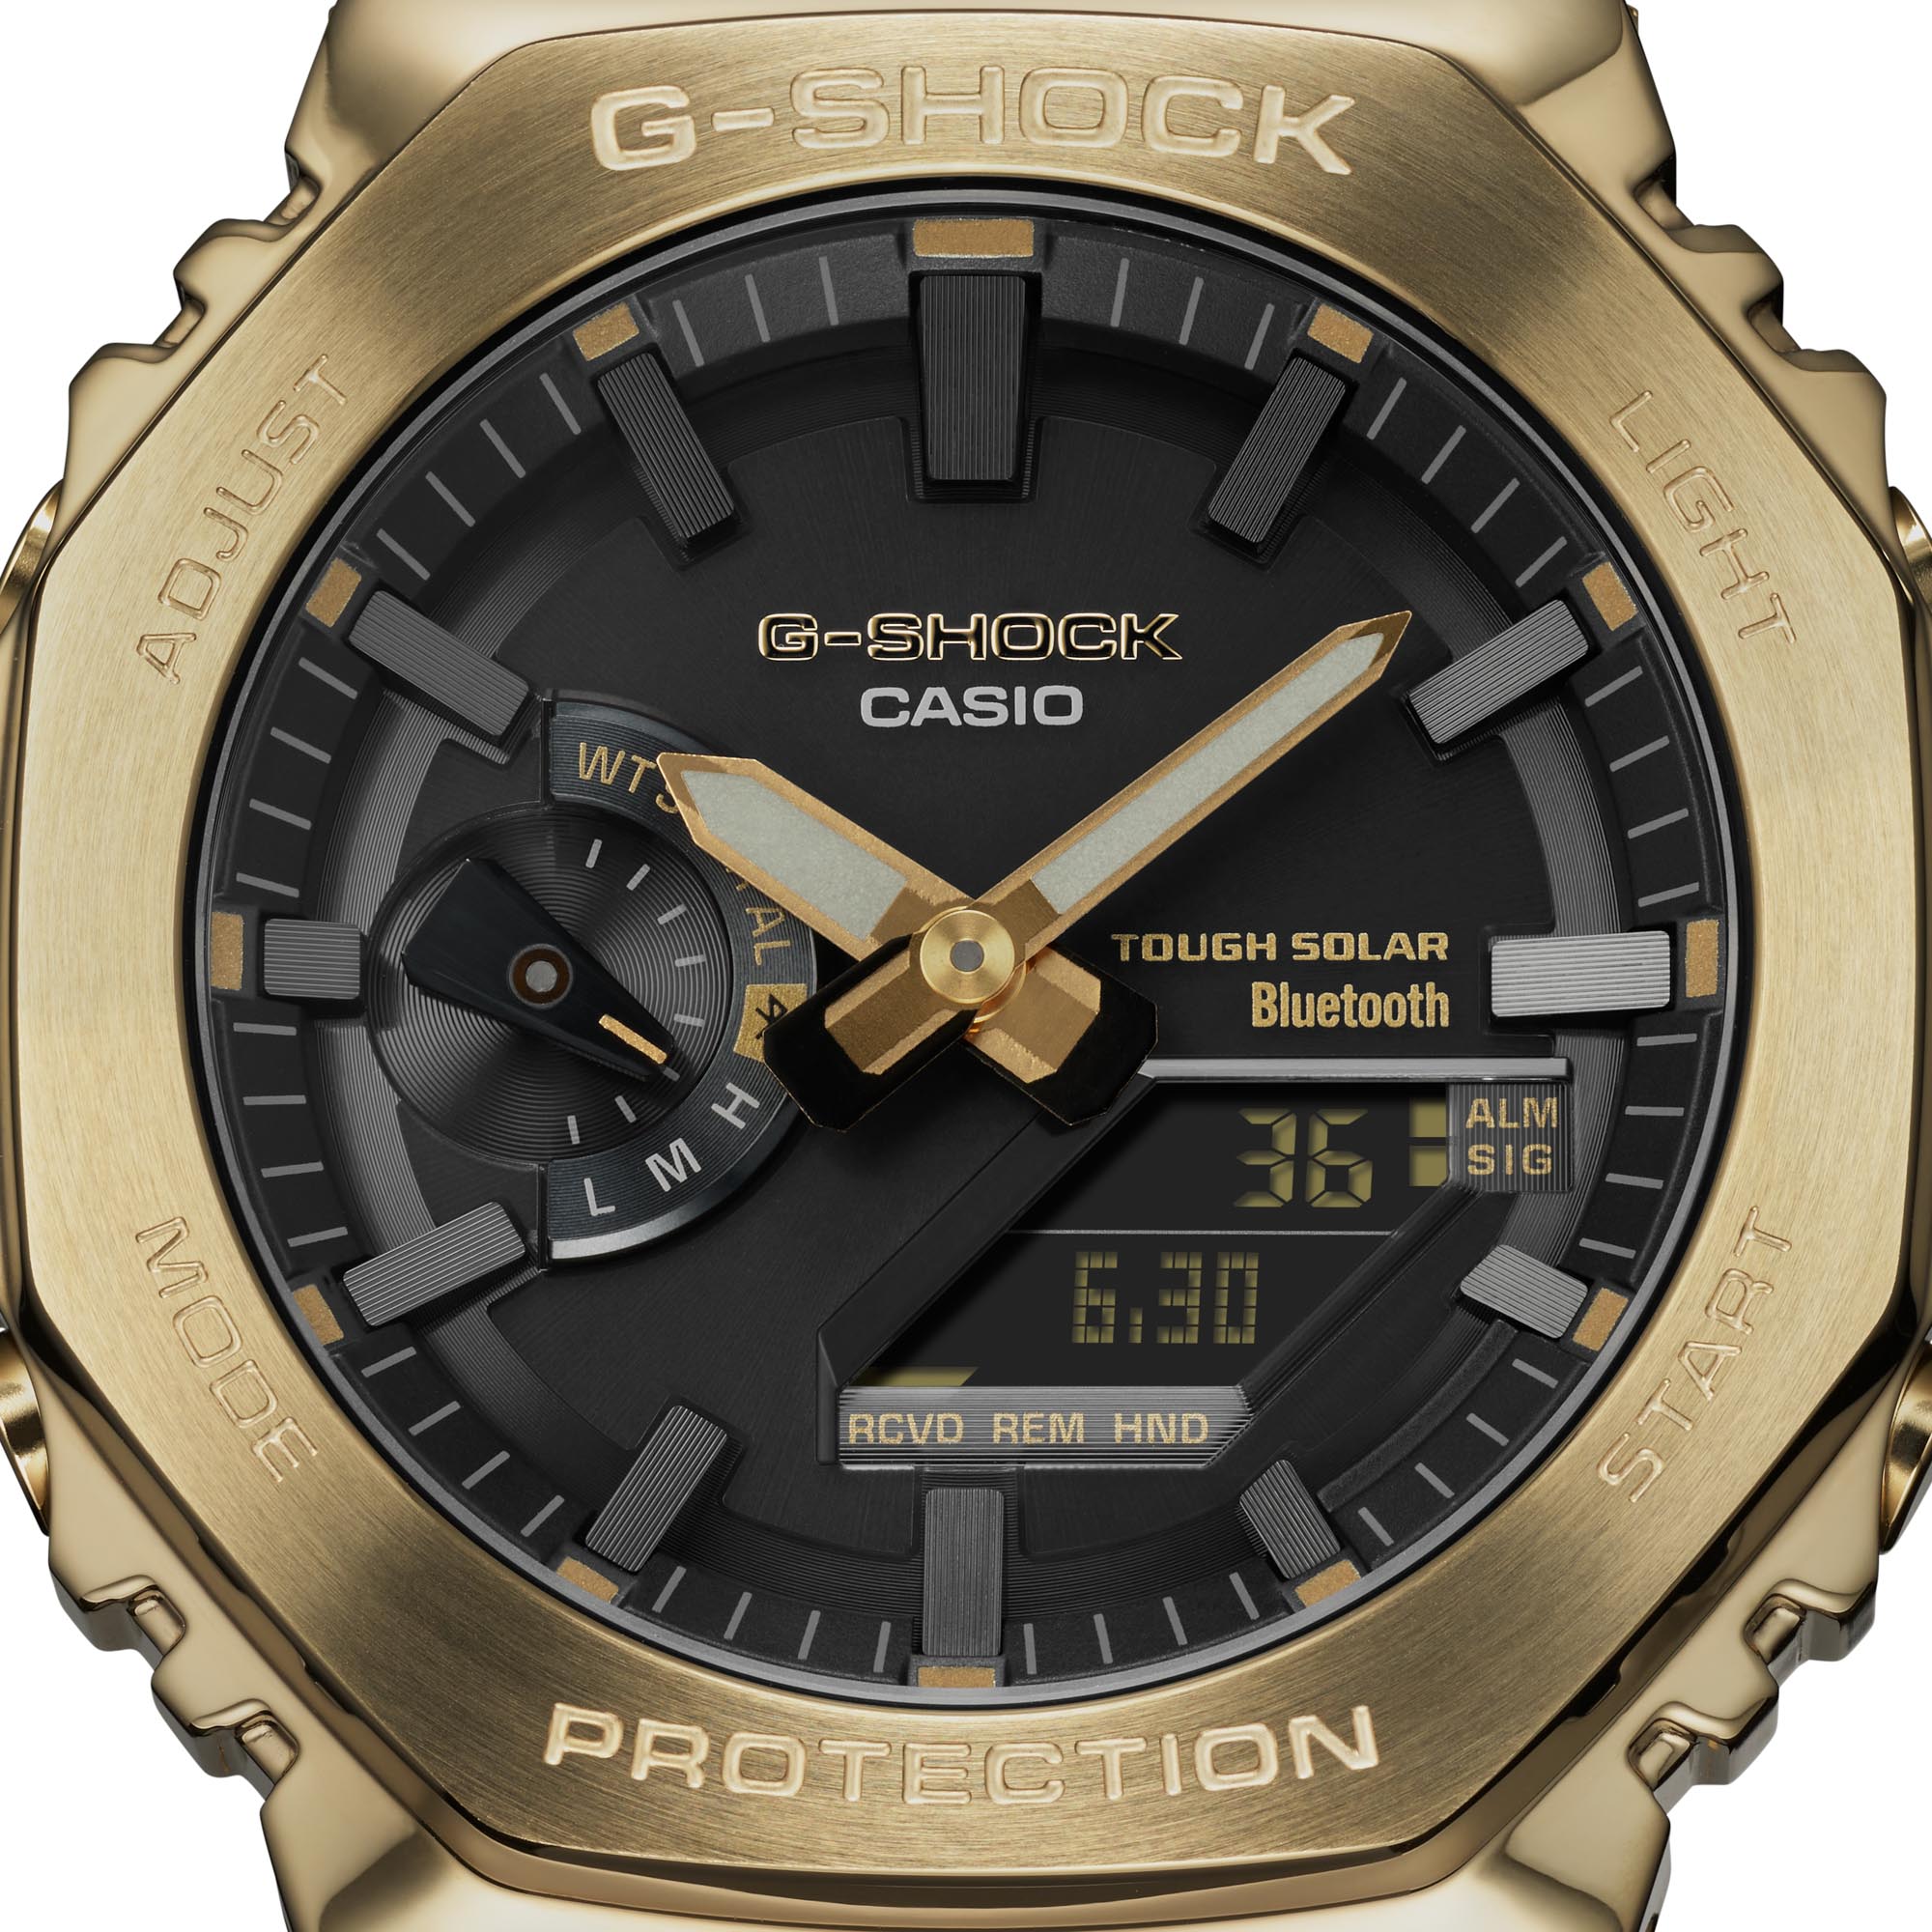 First Look: G-Shock Expands Its All-Gold Line With The GMB2100GD-9A Watch |  aBlogtoWatch